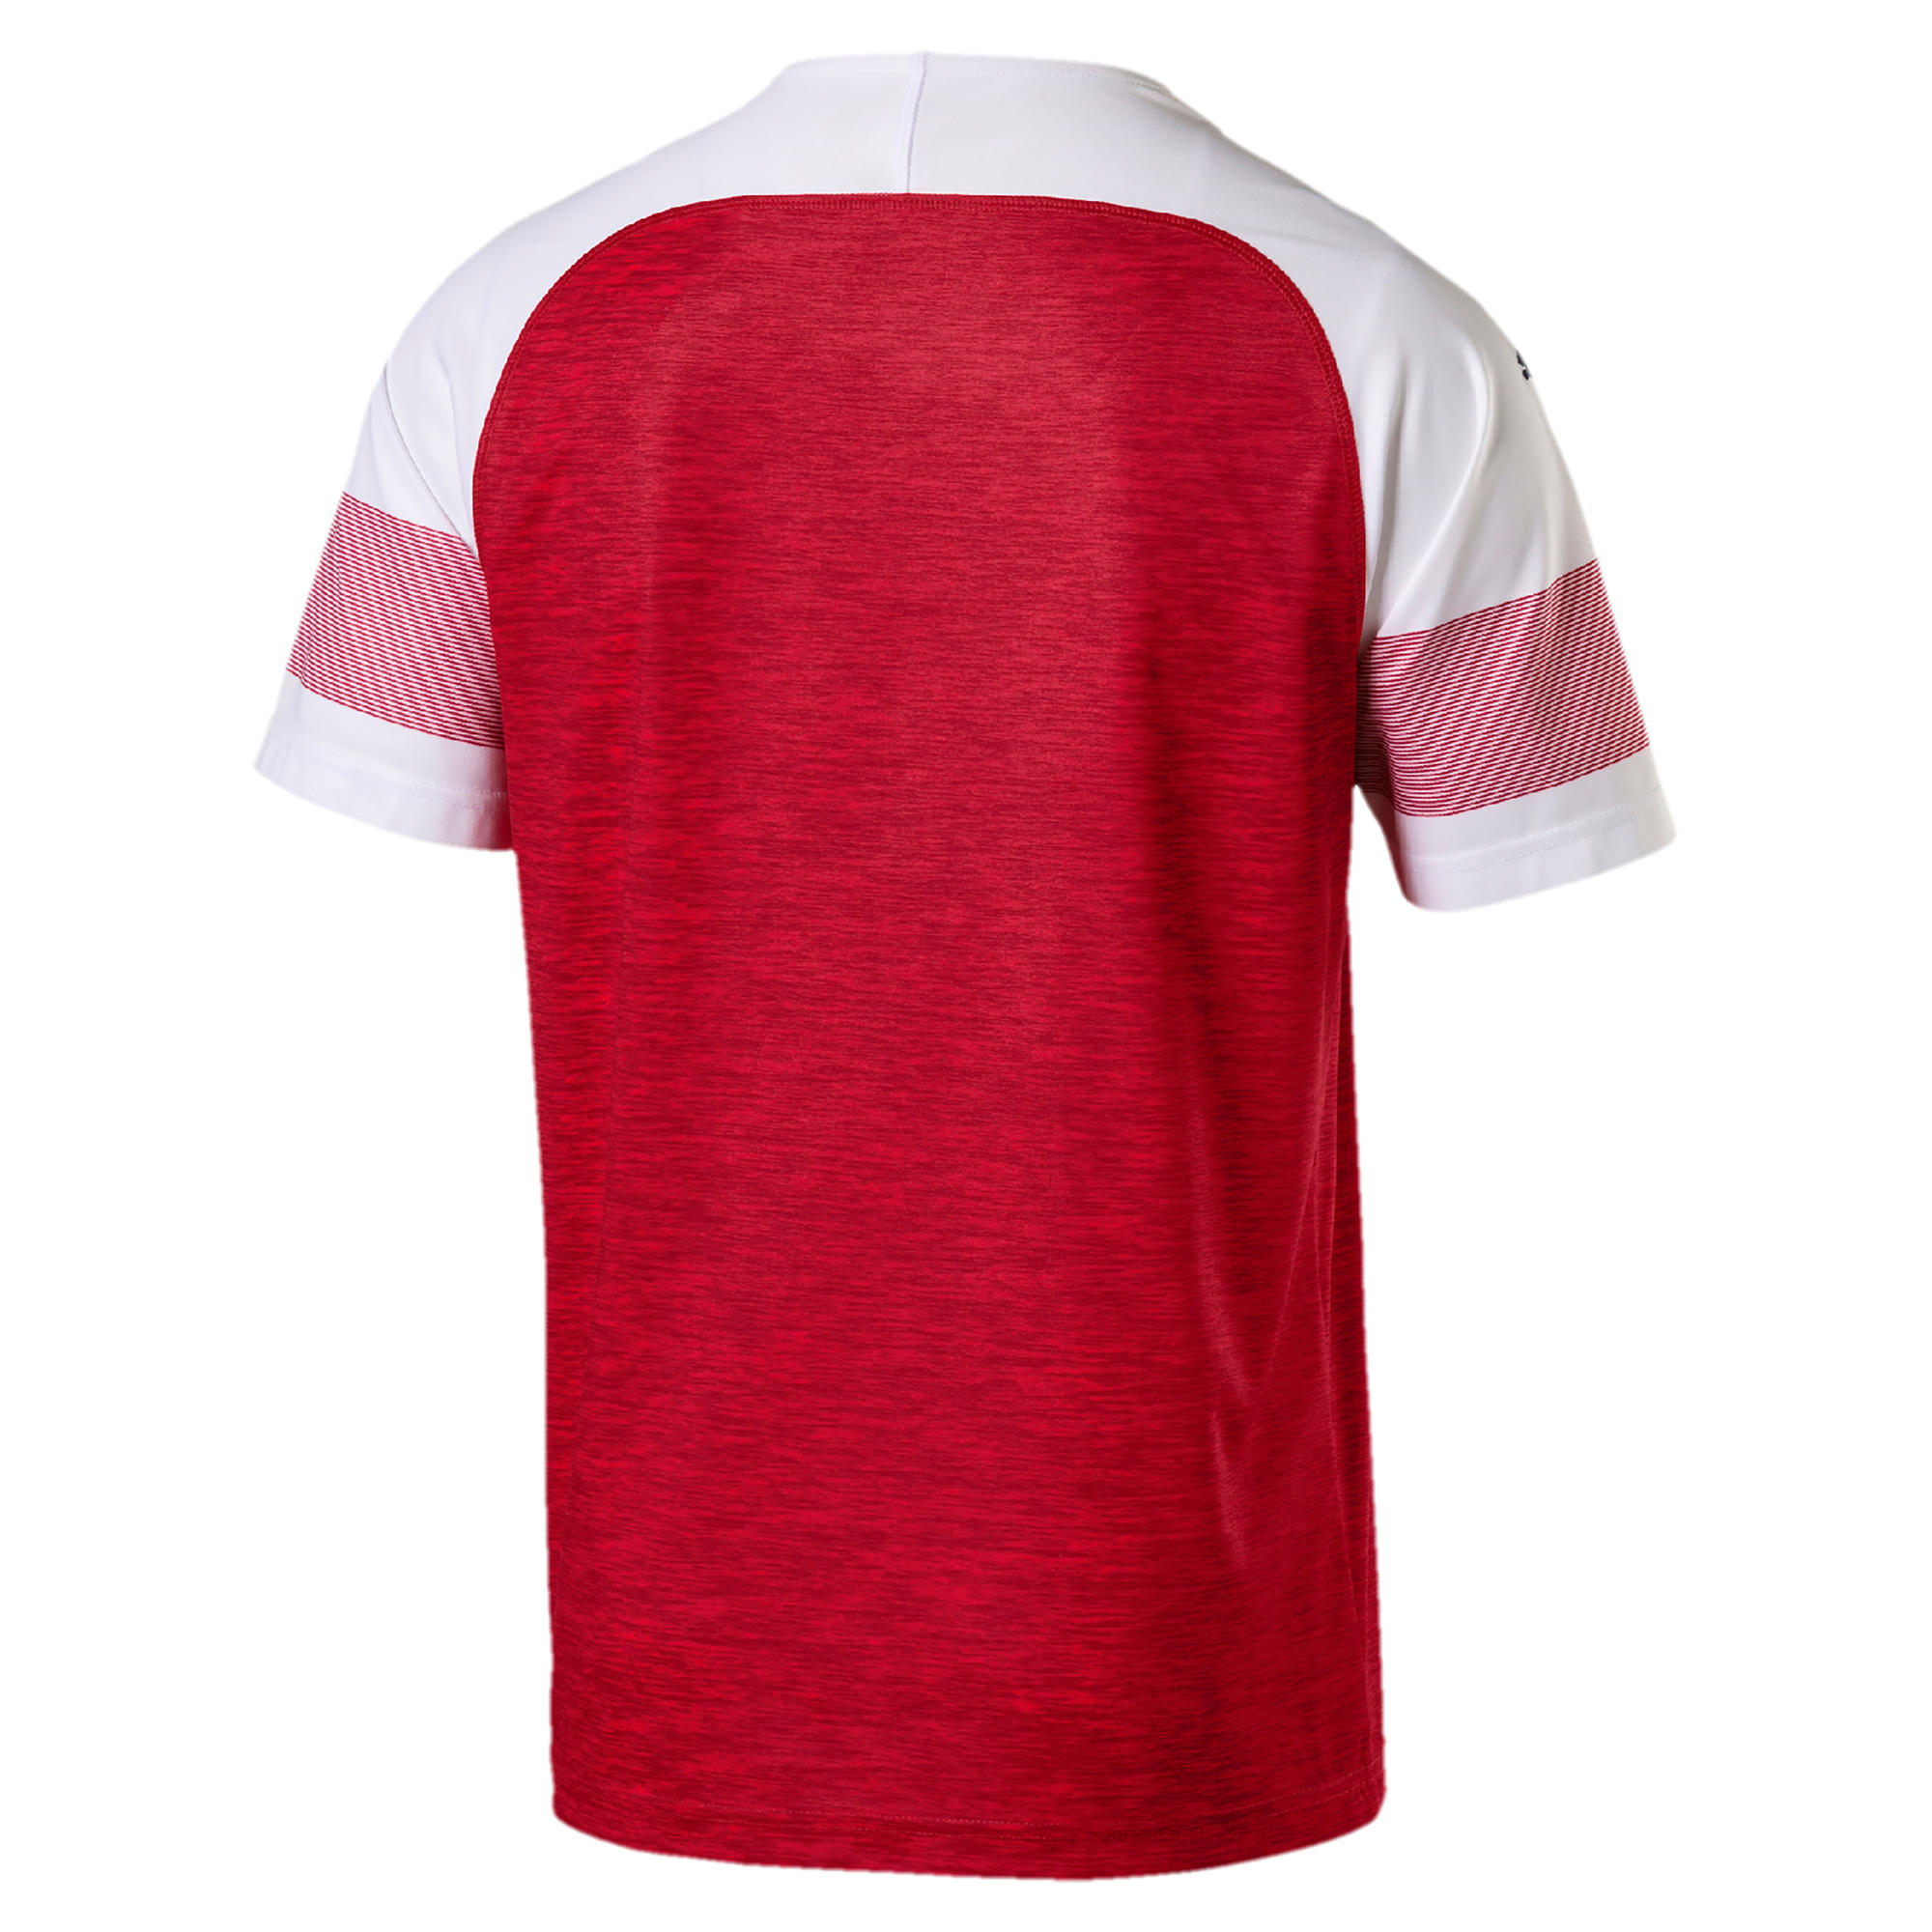 Arsenal 18/19 Adult Football Jersey - Red 2/2